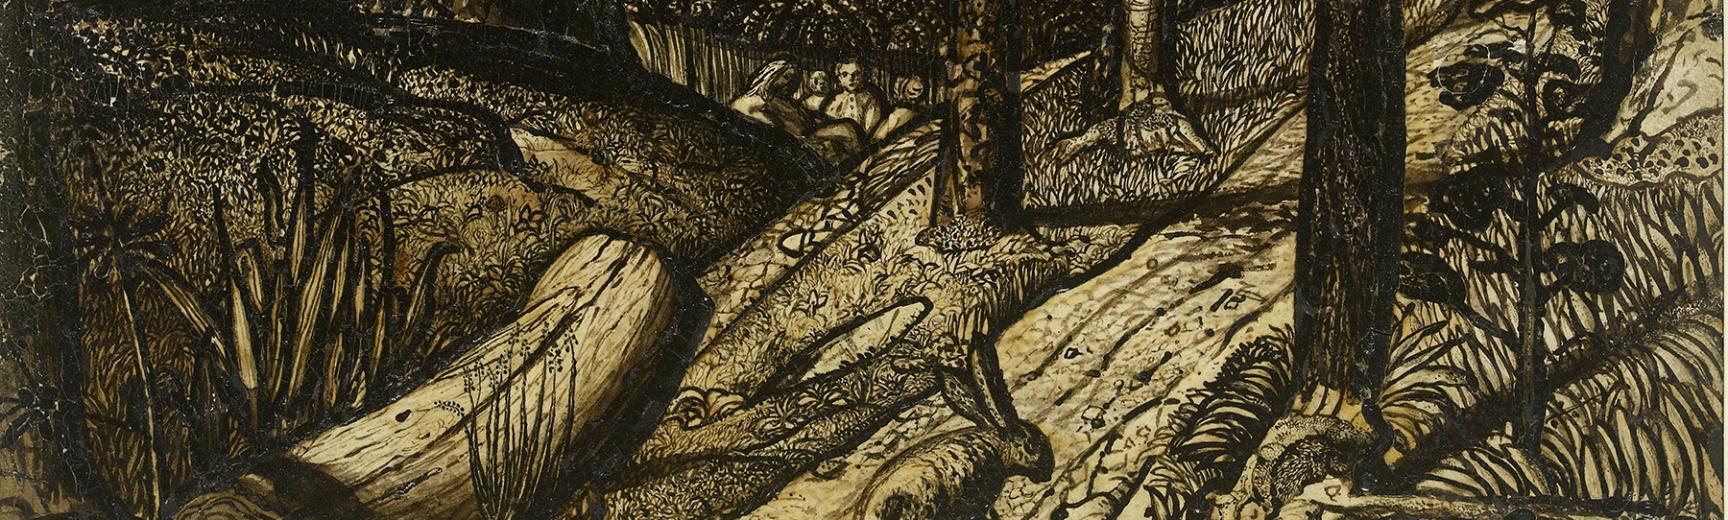 Works by Samuel Palmer – The Western Art Print Room at the Ashmolean Museum